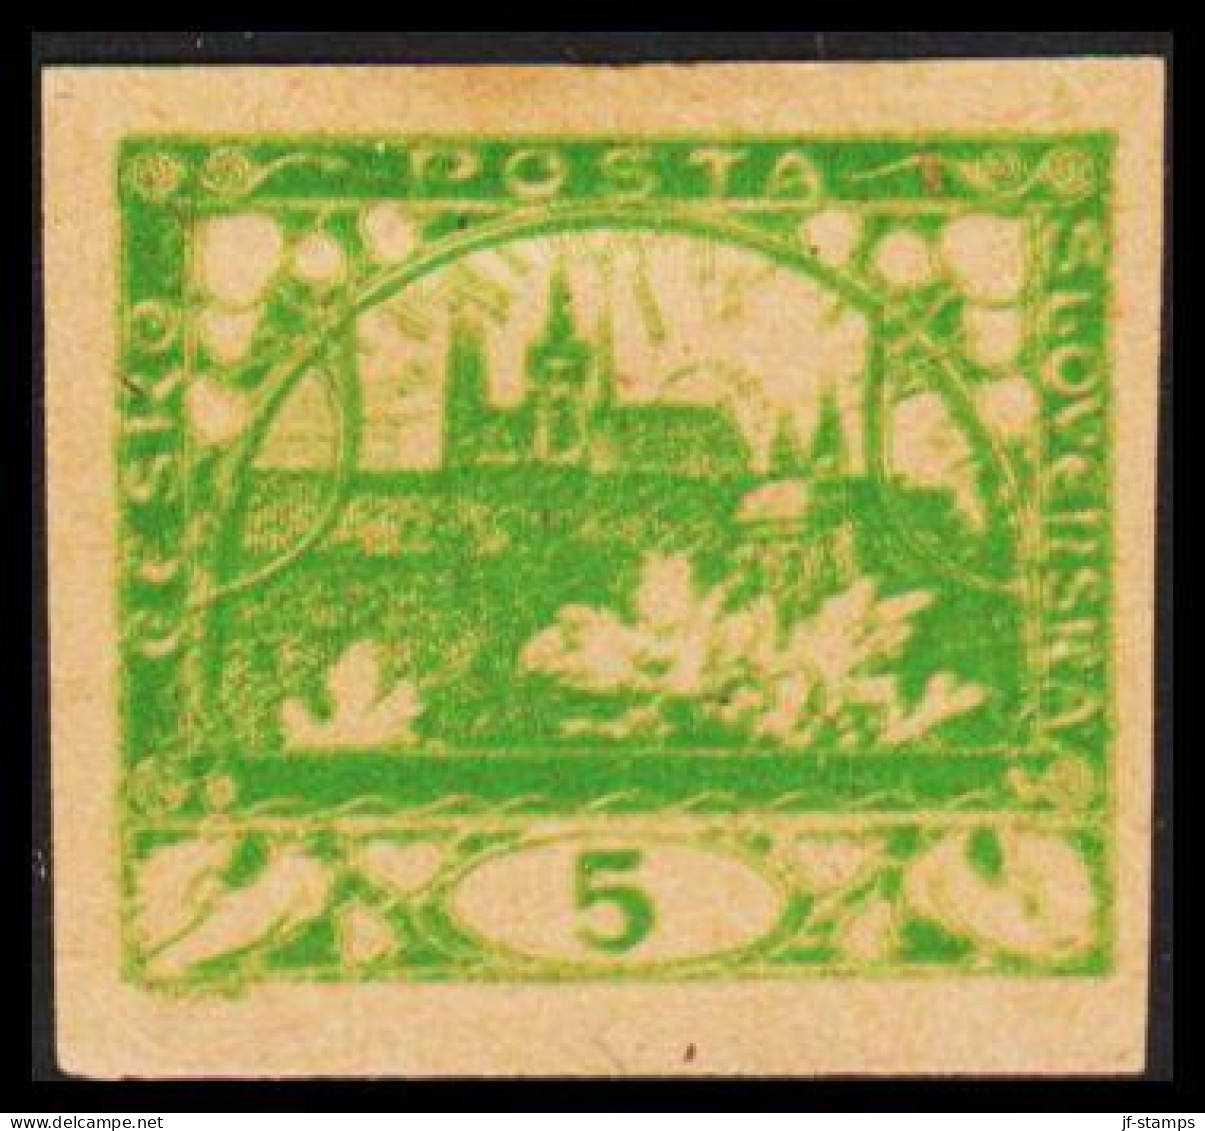 1919. CESKOSLOVENSKO. Hradschin. 5 Heller. Imperforated. Proof Or Esssay/Printers Waste Without... (Michel 2) - JF540188 - Unused Stamps